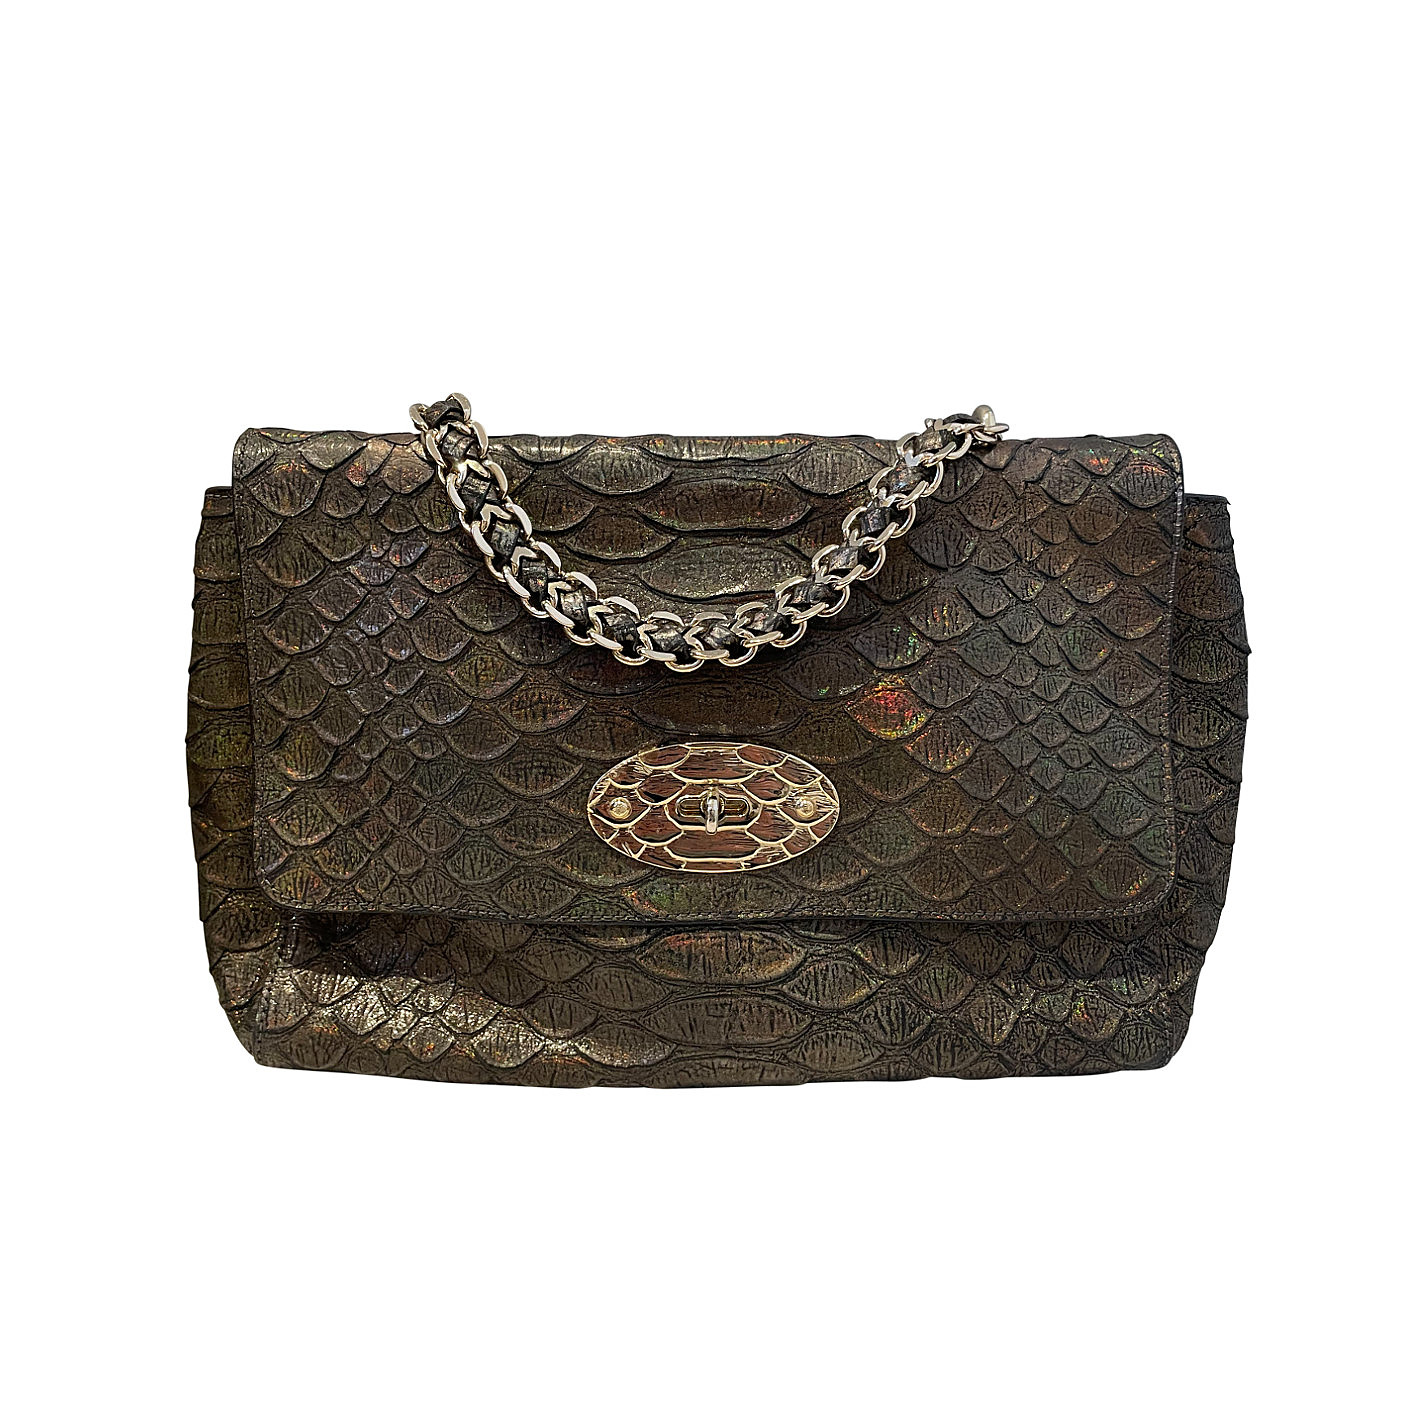 Mulberry Embossed Metallic Leather Bag